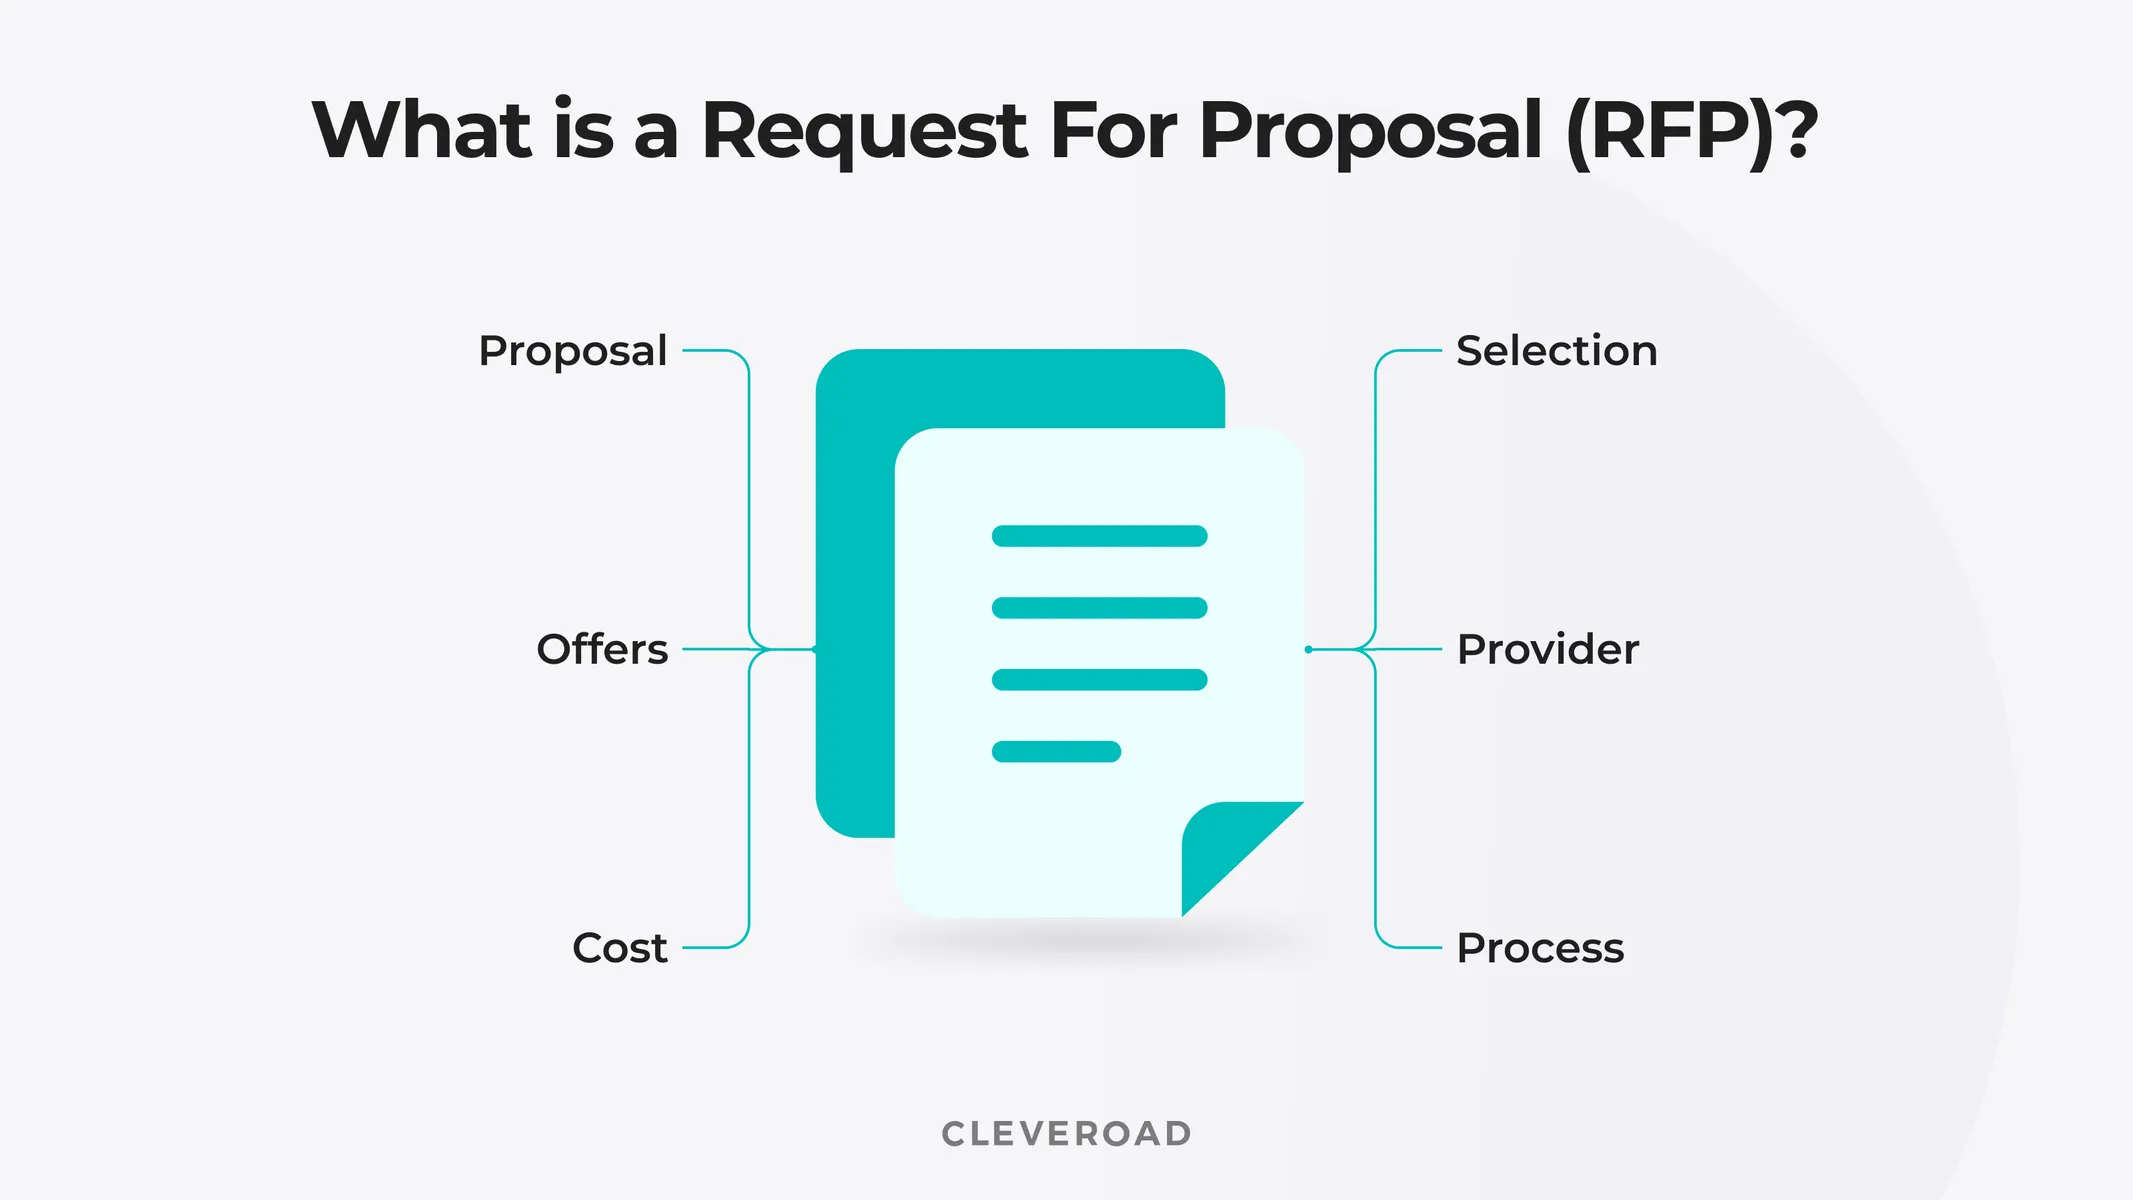 What is an RFP?